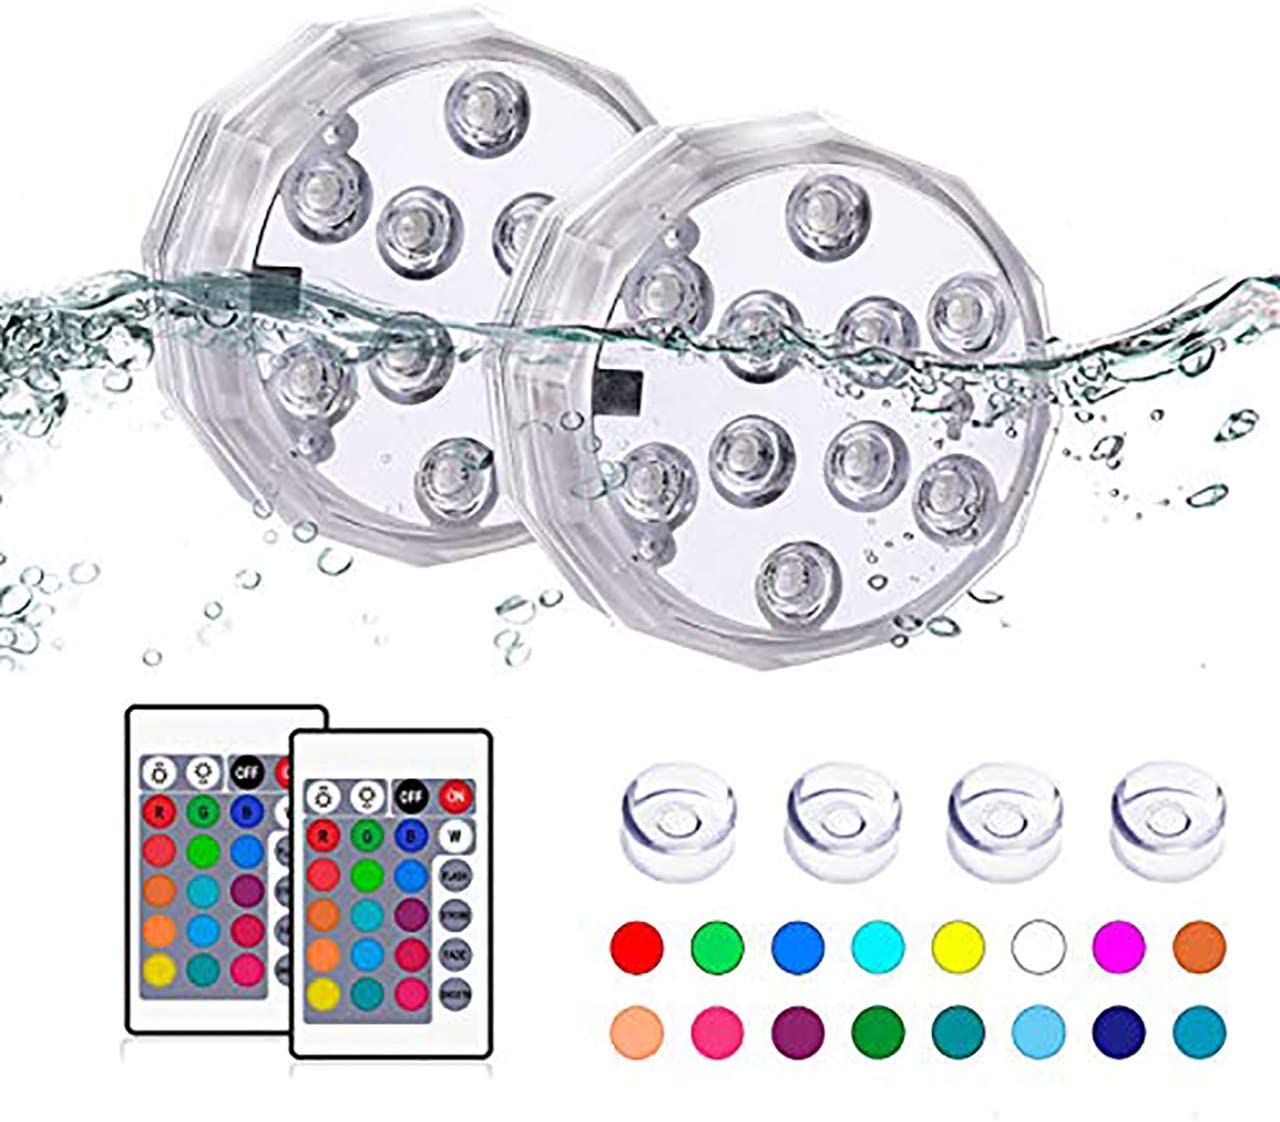 Submersible Led Lights with Remote - Waterproof Underwater Led Light Battery Operated Controlled 16 Color Changing Lamp with 4pcs Suction Cup for Pool Vase Aquarium Decoration 2 Pack